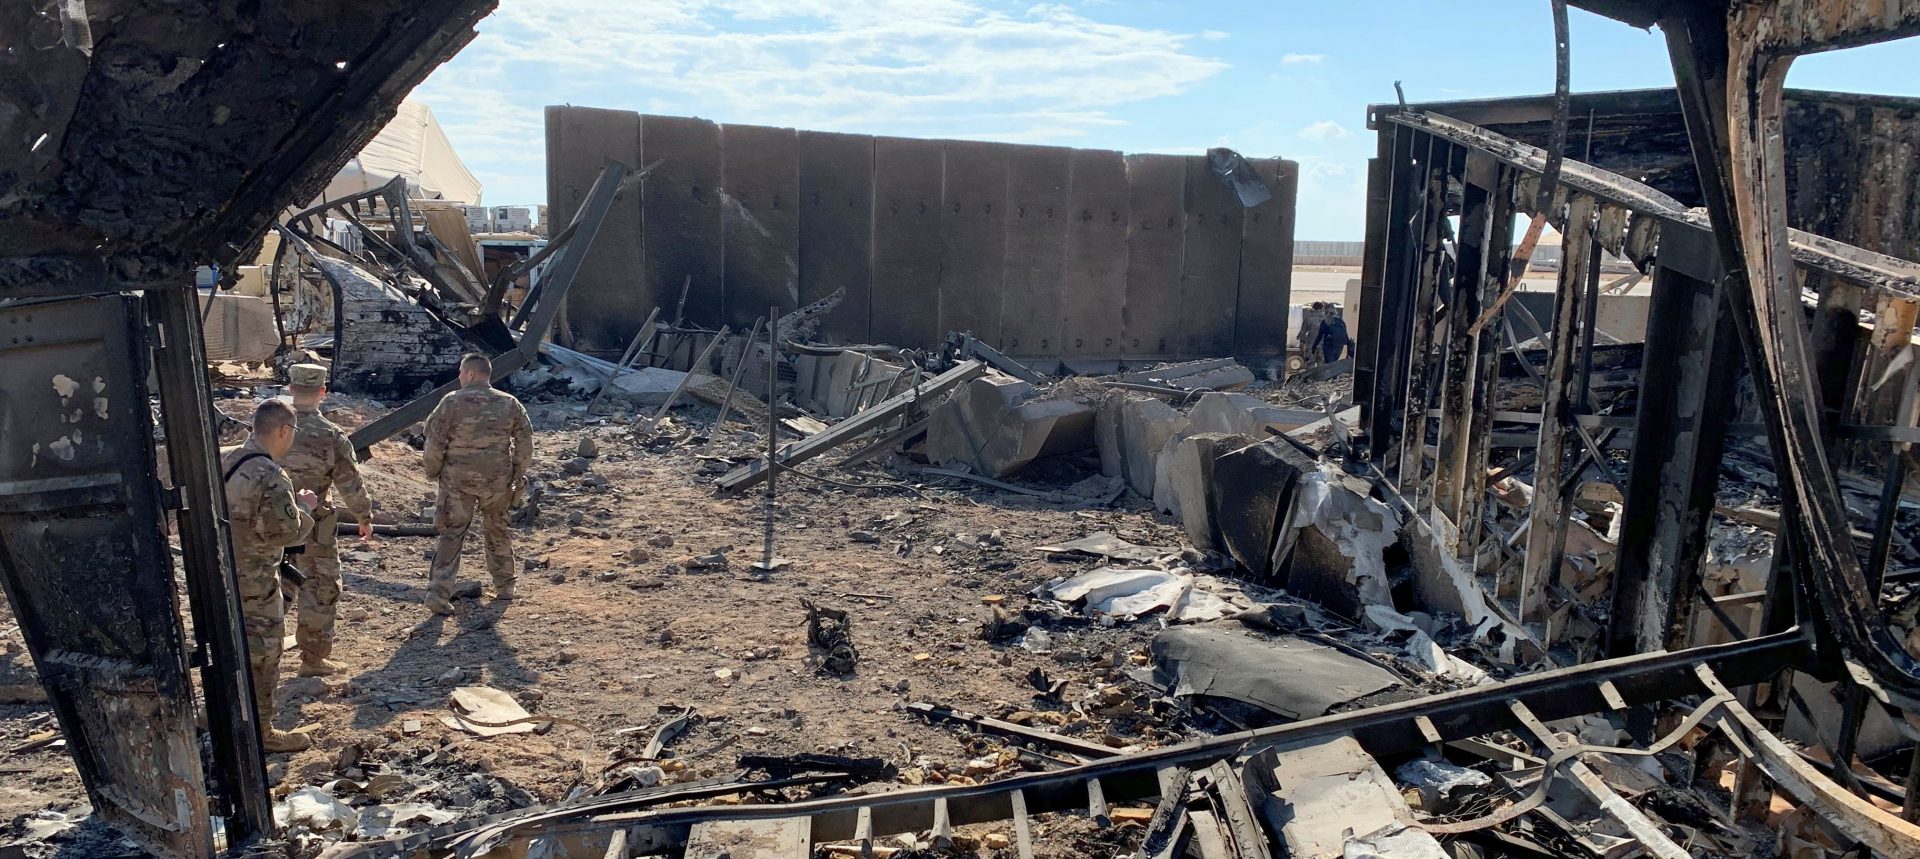 The Iranian missile strikes earlier this month caused extensive damage at the Ain al-Assad air base, northwest of Baghdad — as evident in this photograph taken Jan. 13, about a week after the attacks. The Pentagon says at least 50 U.S. service members at Ain al-Assad and Iran's other targets have been diagnosed with brain injury.